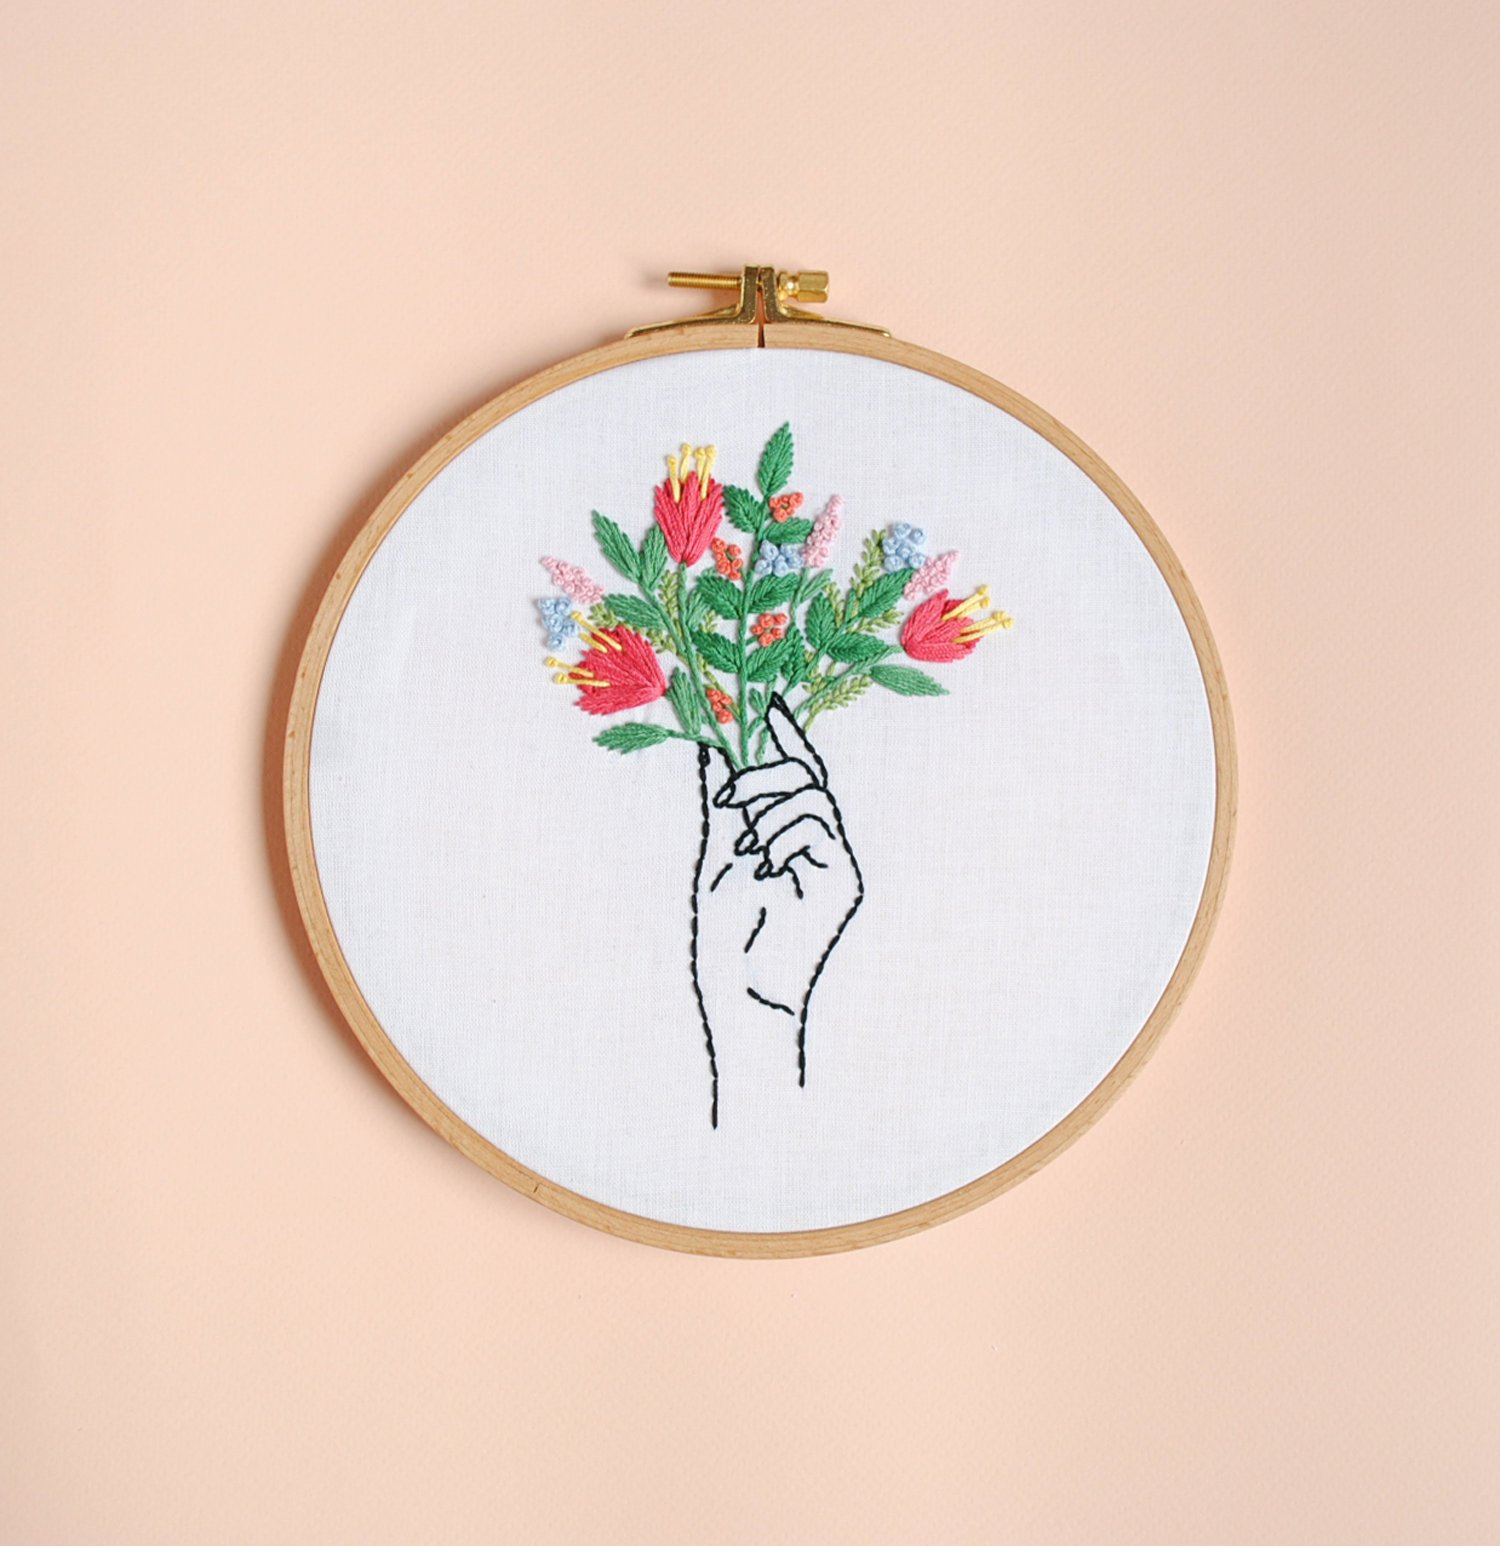 Diy Embroidery Patterns Pdf Hand Embroidery Patterns Diy Hoop Art